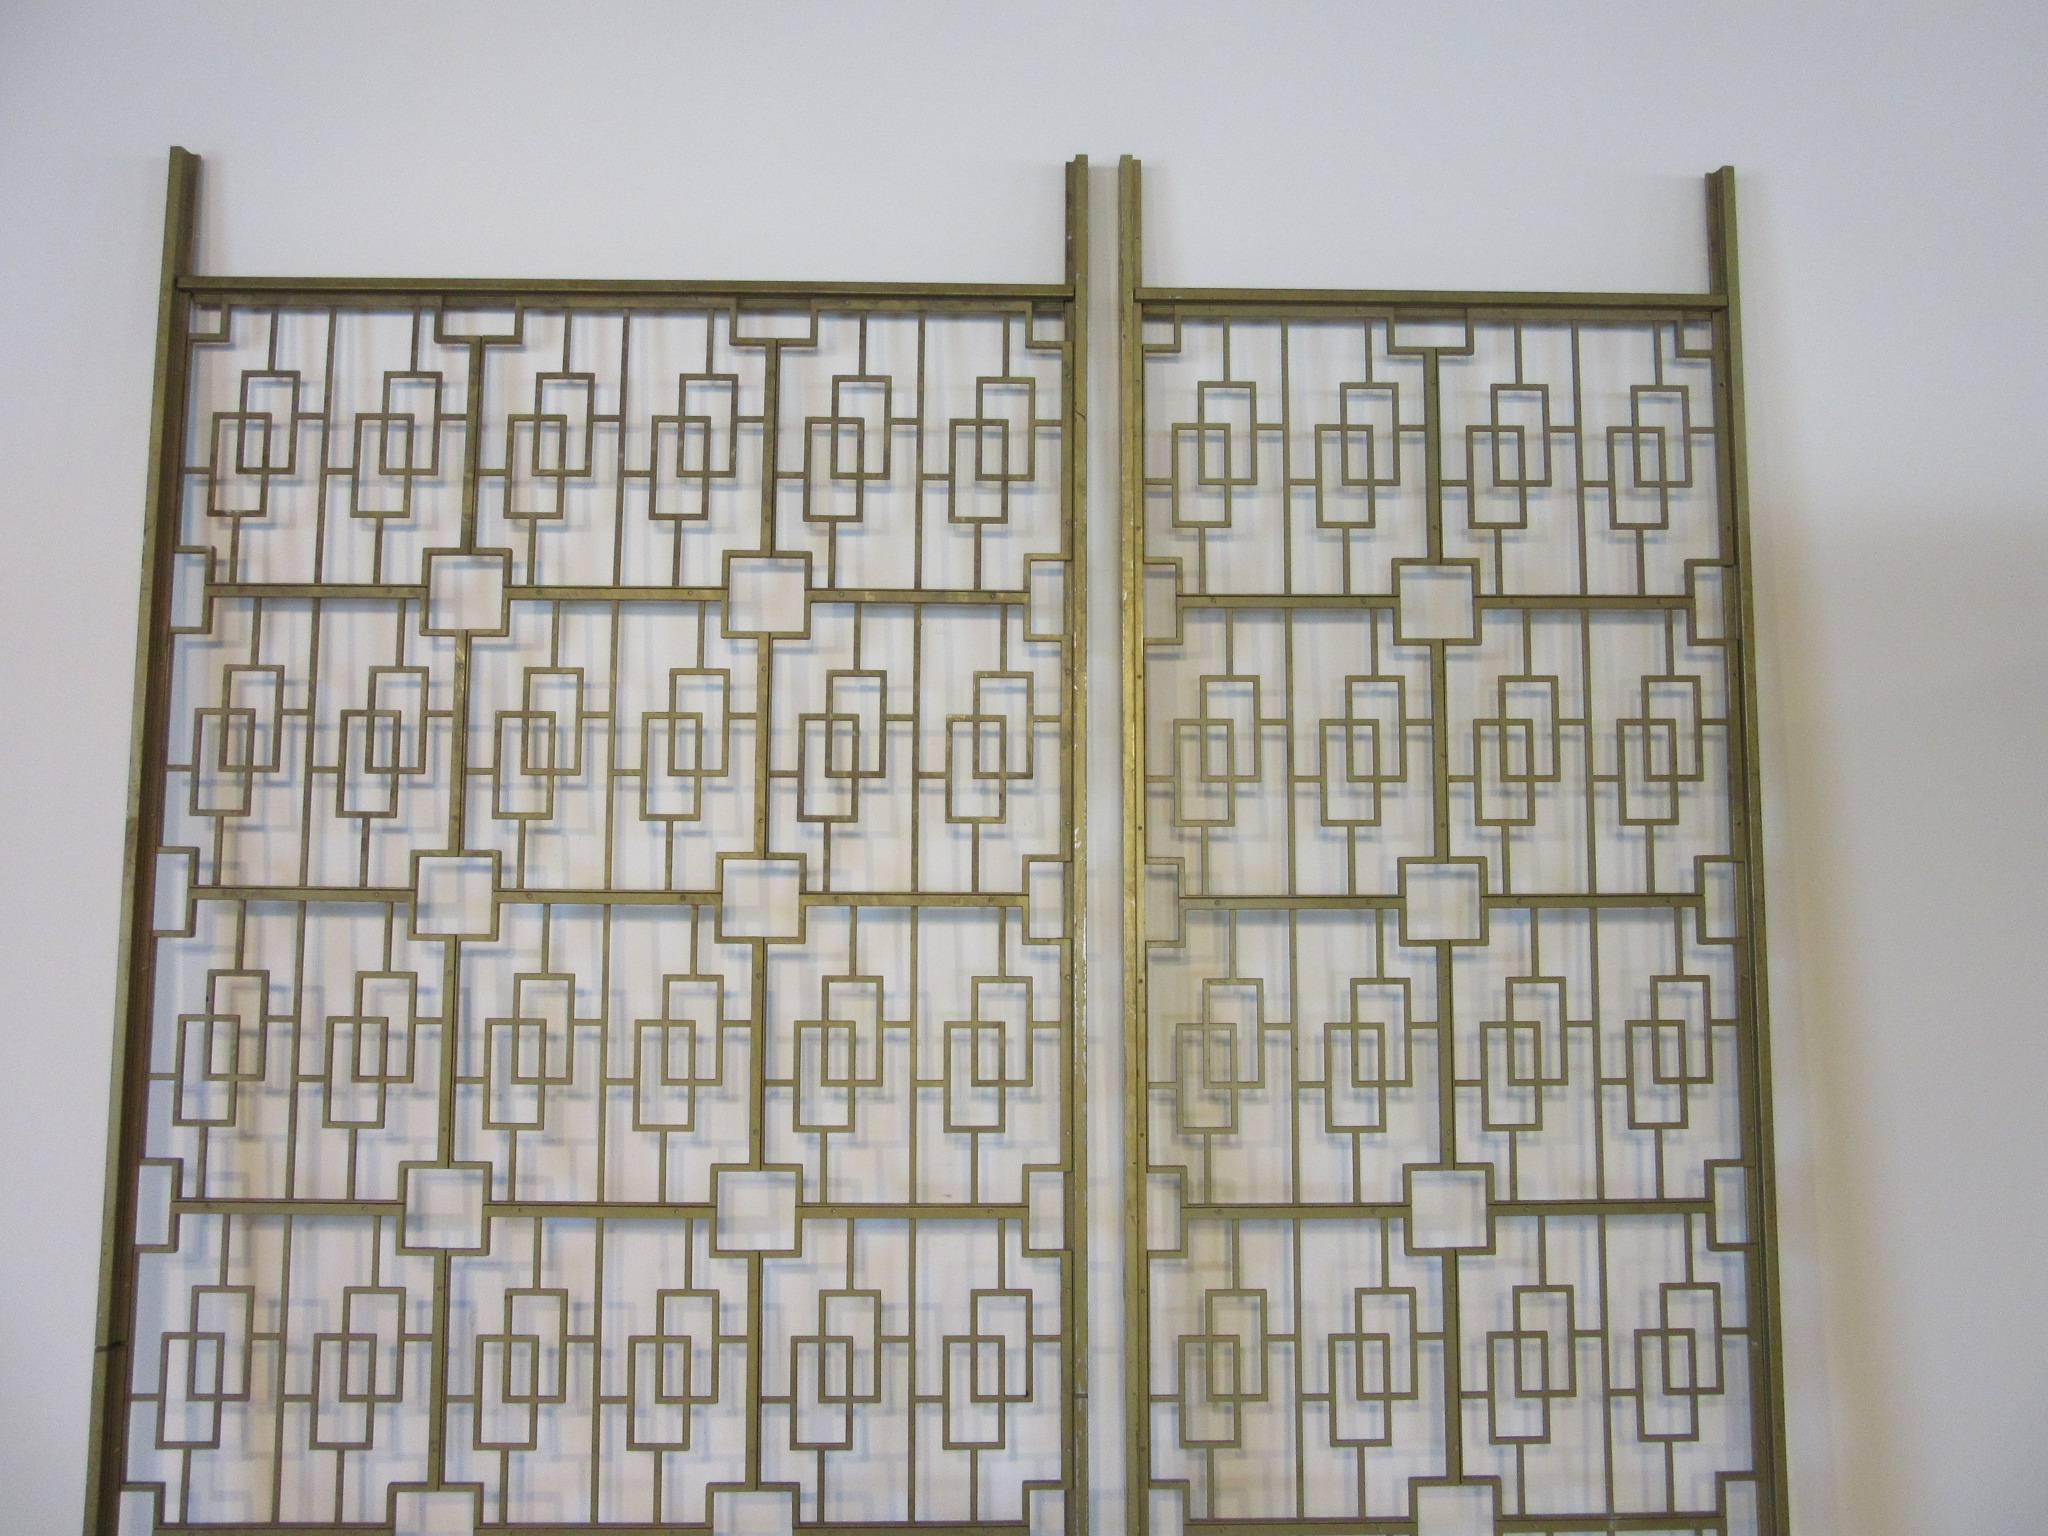 A two-piece cast aluminum architectural decorative room divider or screen painted in a brass tone with screwed together design sections mounted on flat bars for installation. Well crafted and excellent for that entrance way or room that needs some